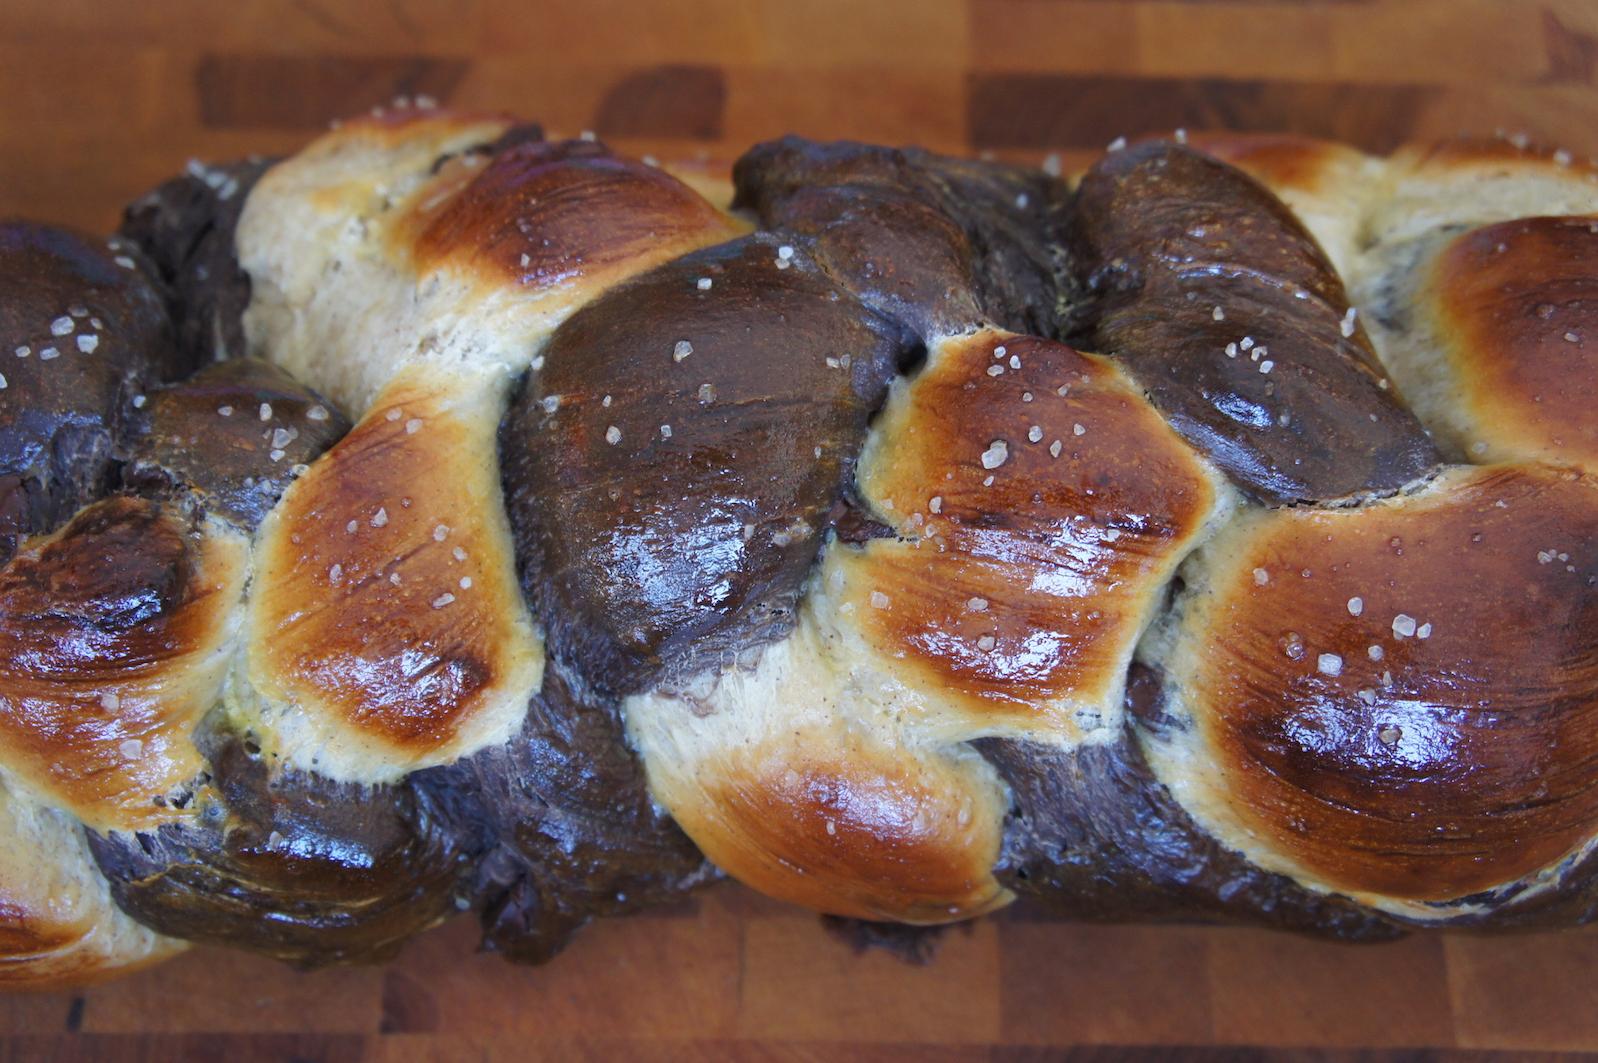  A beautiful braided chocolate chip challah ready to be sliced and enjoyed.